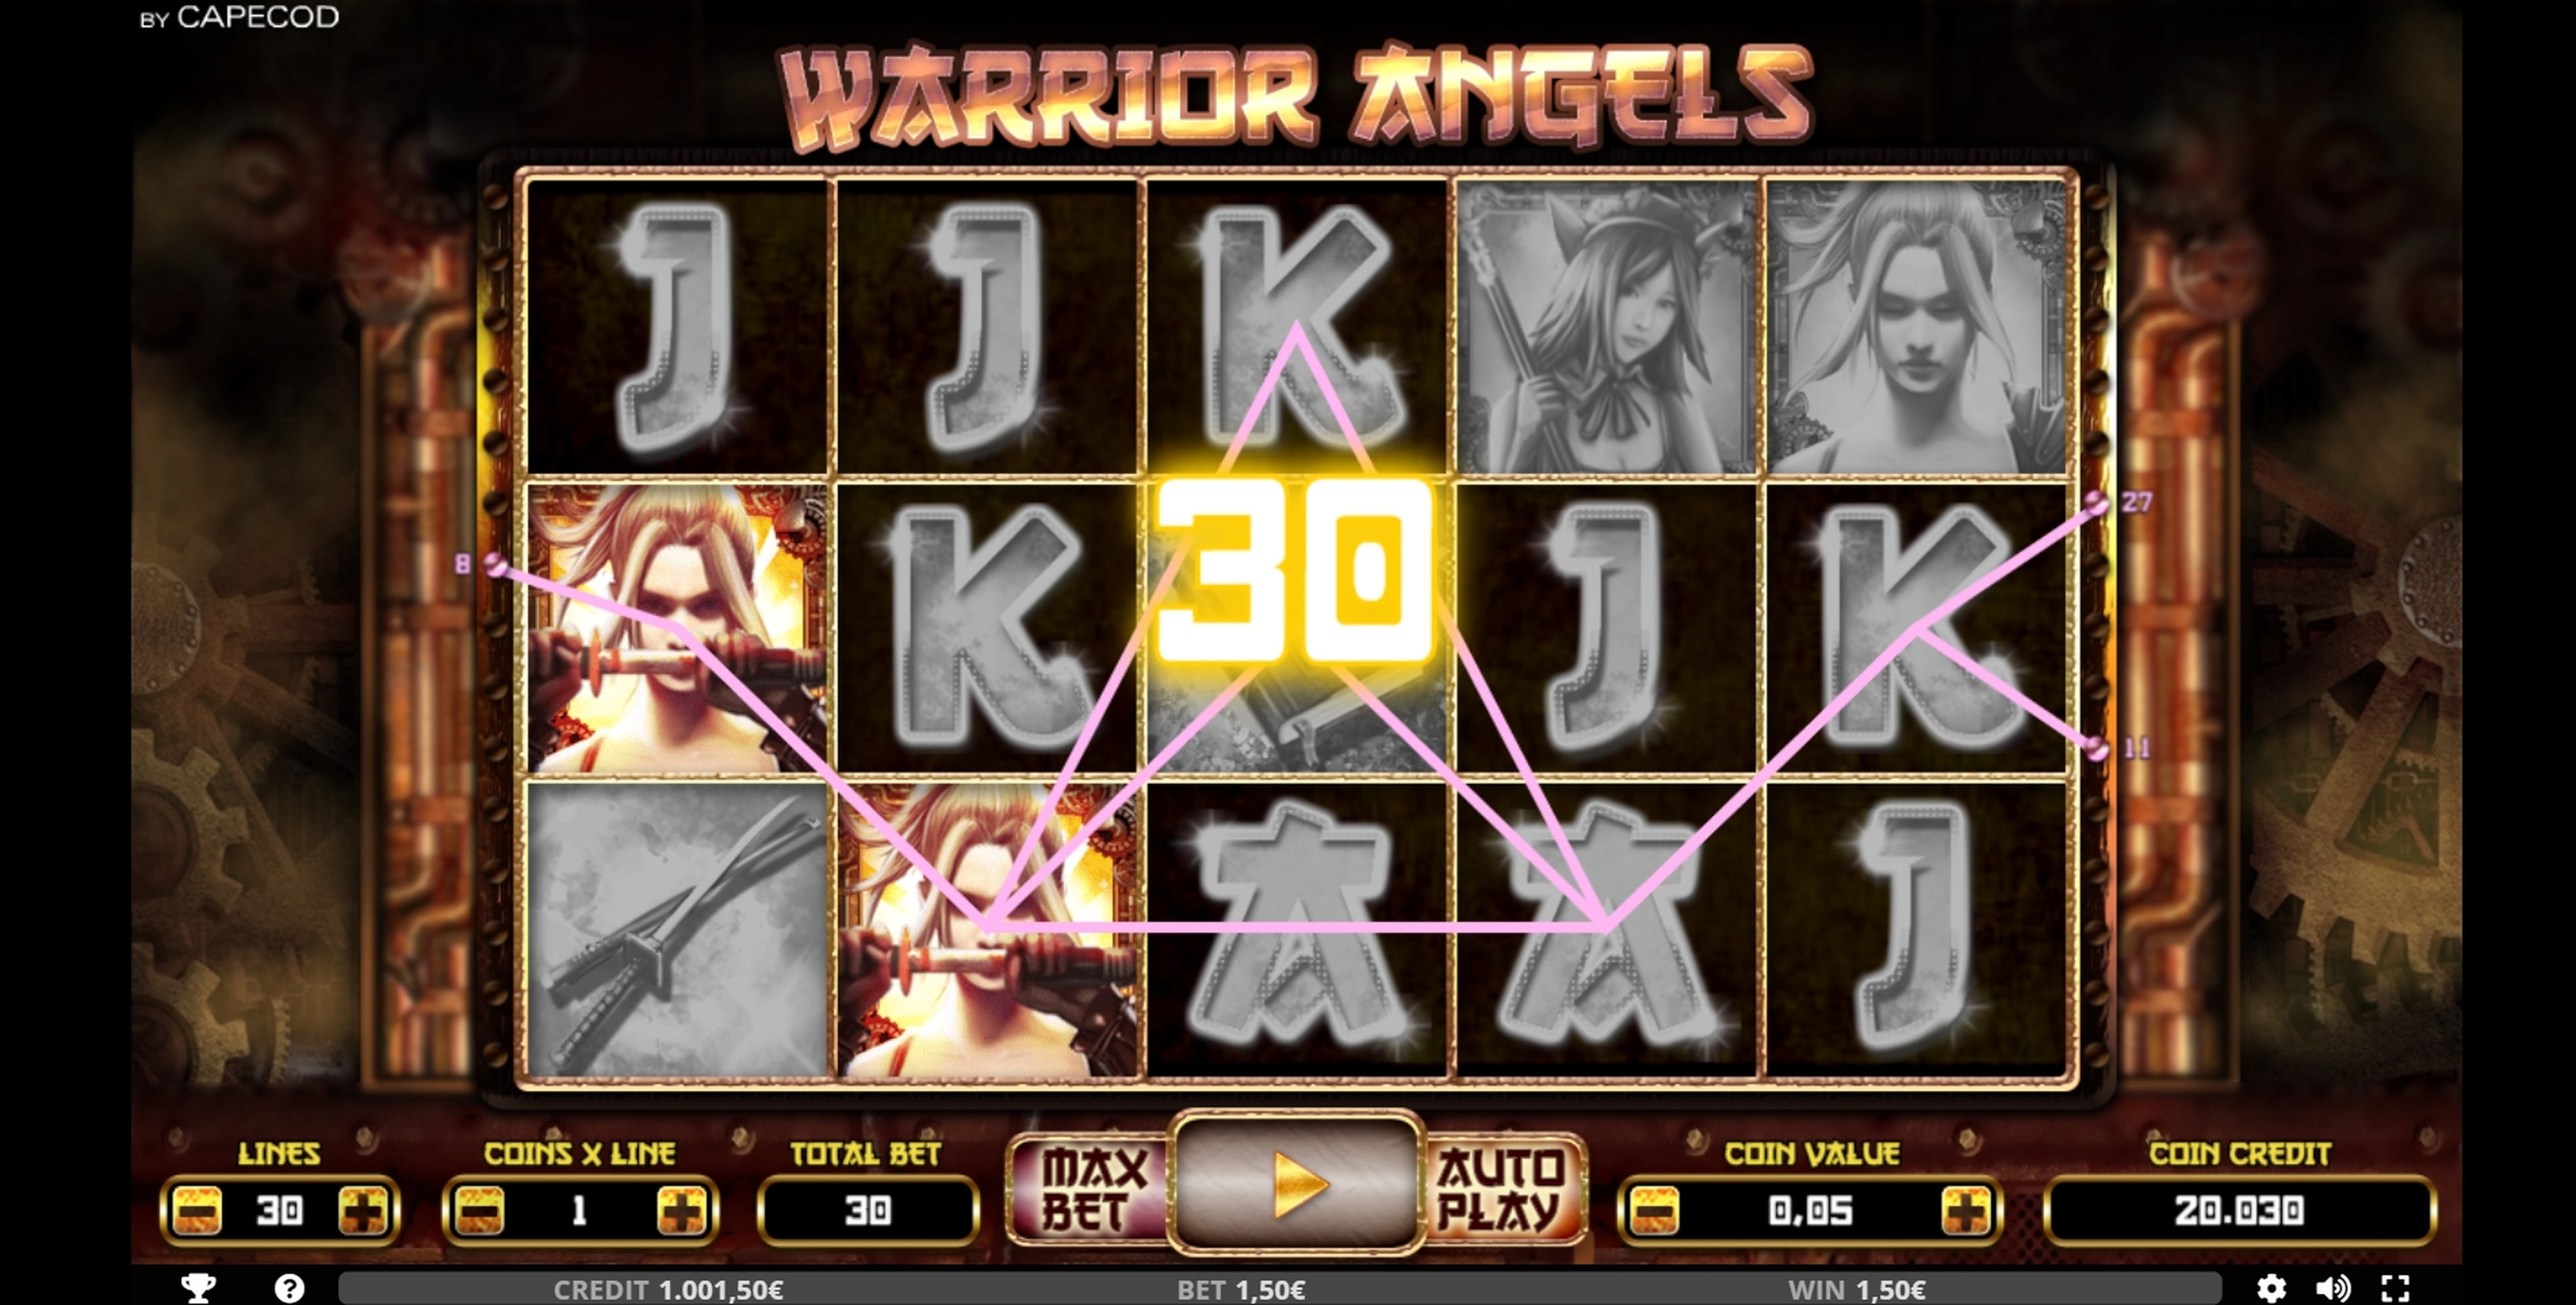 Win Money in Warrior Angels Free Slot Game by Capecod Gaming